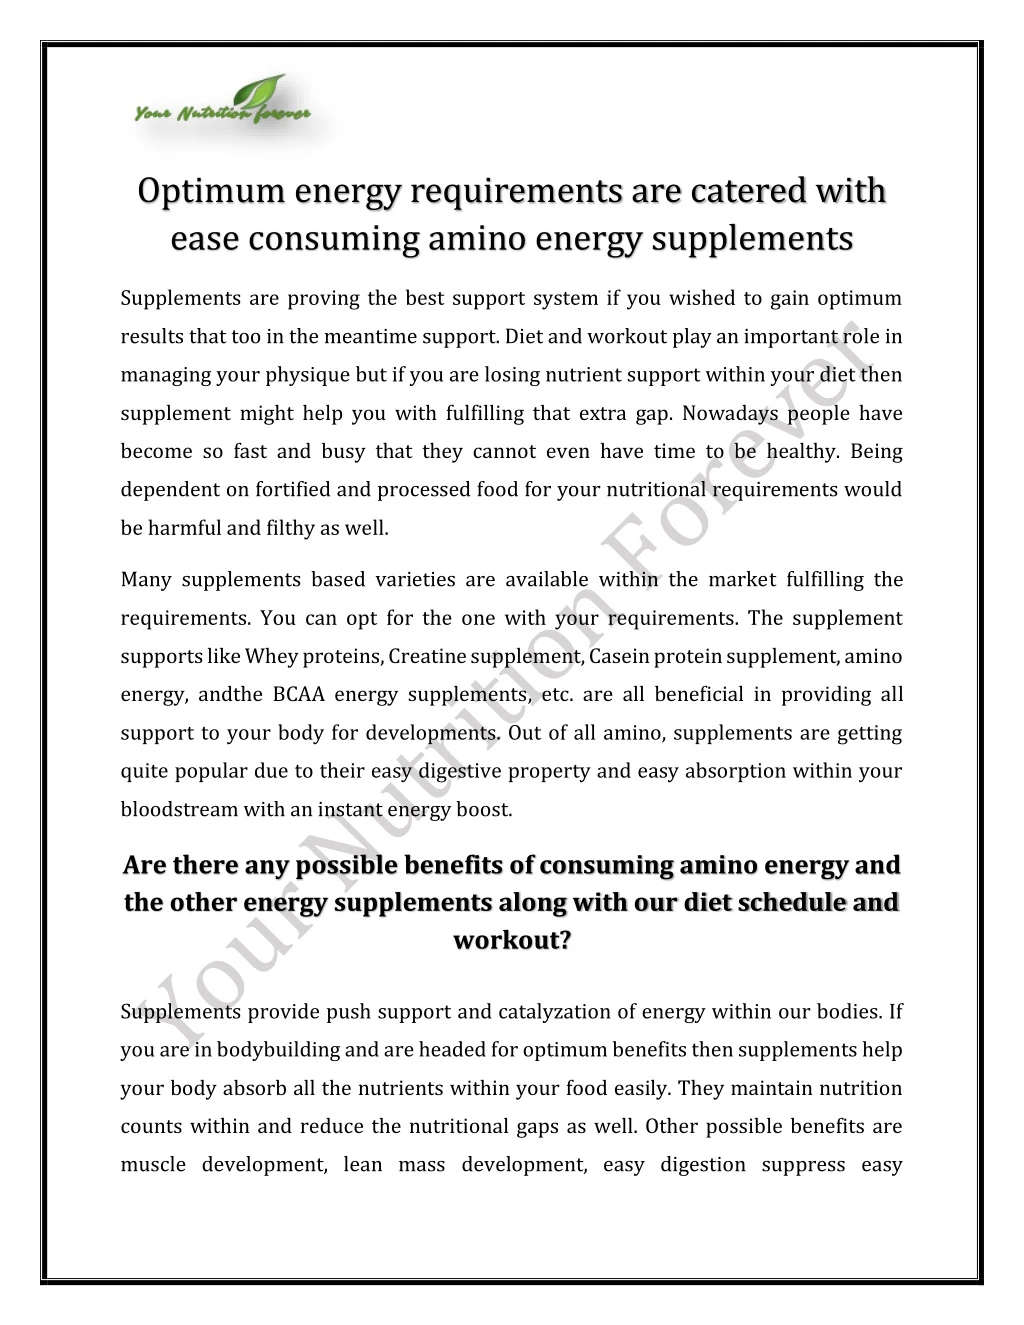 optimum energy requirements are catered with ease